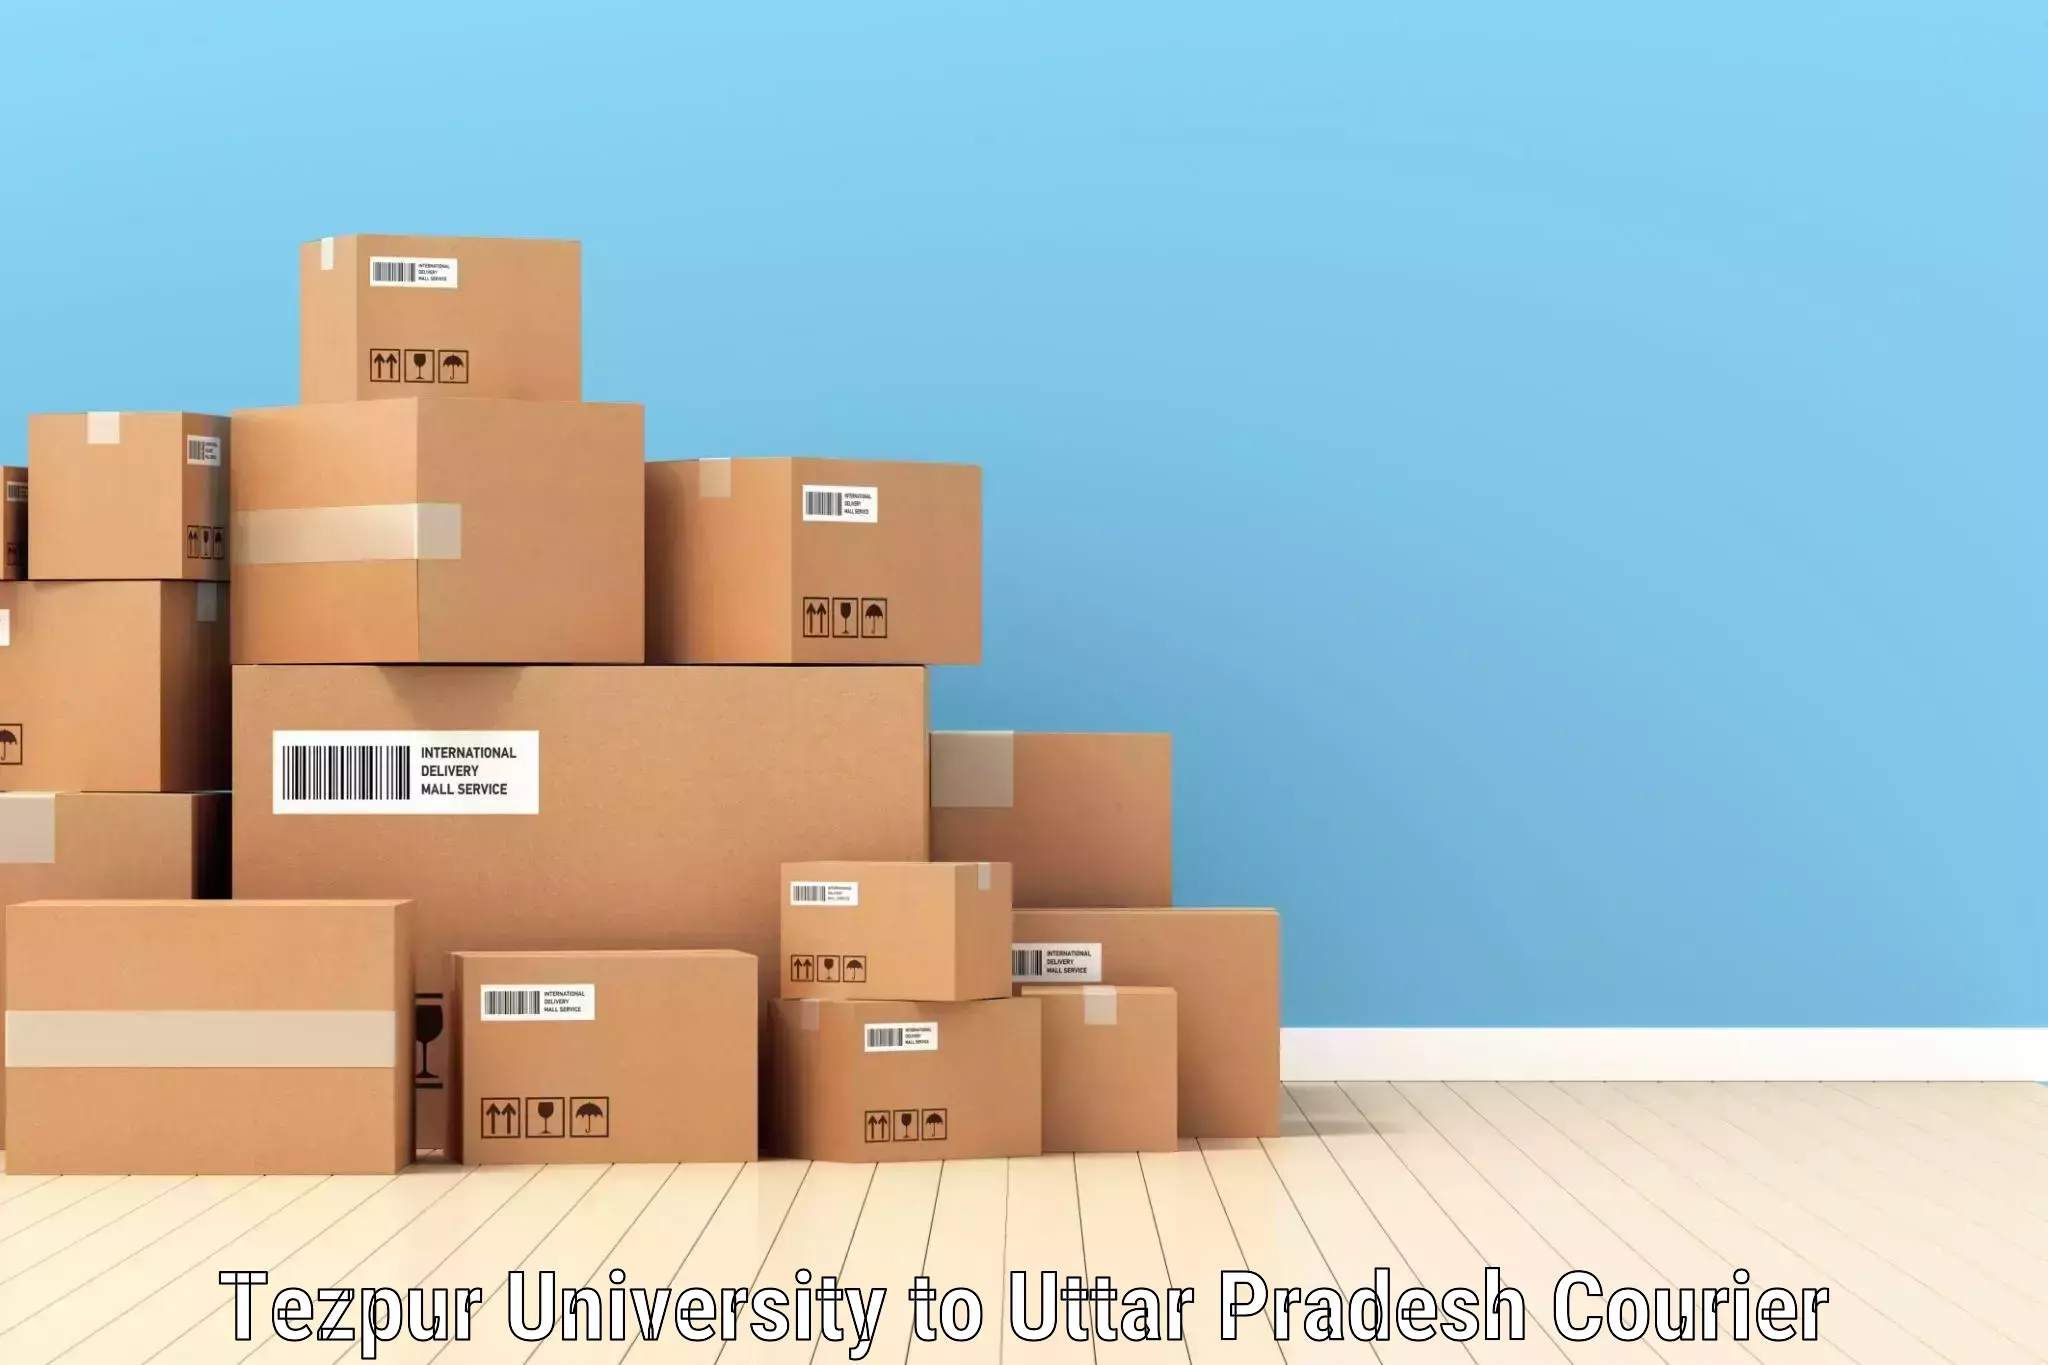 Online package tracking Tezpur University to Allahabad